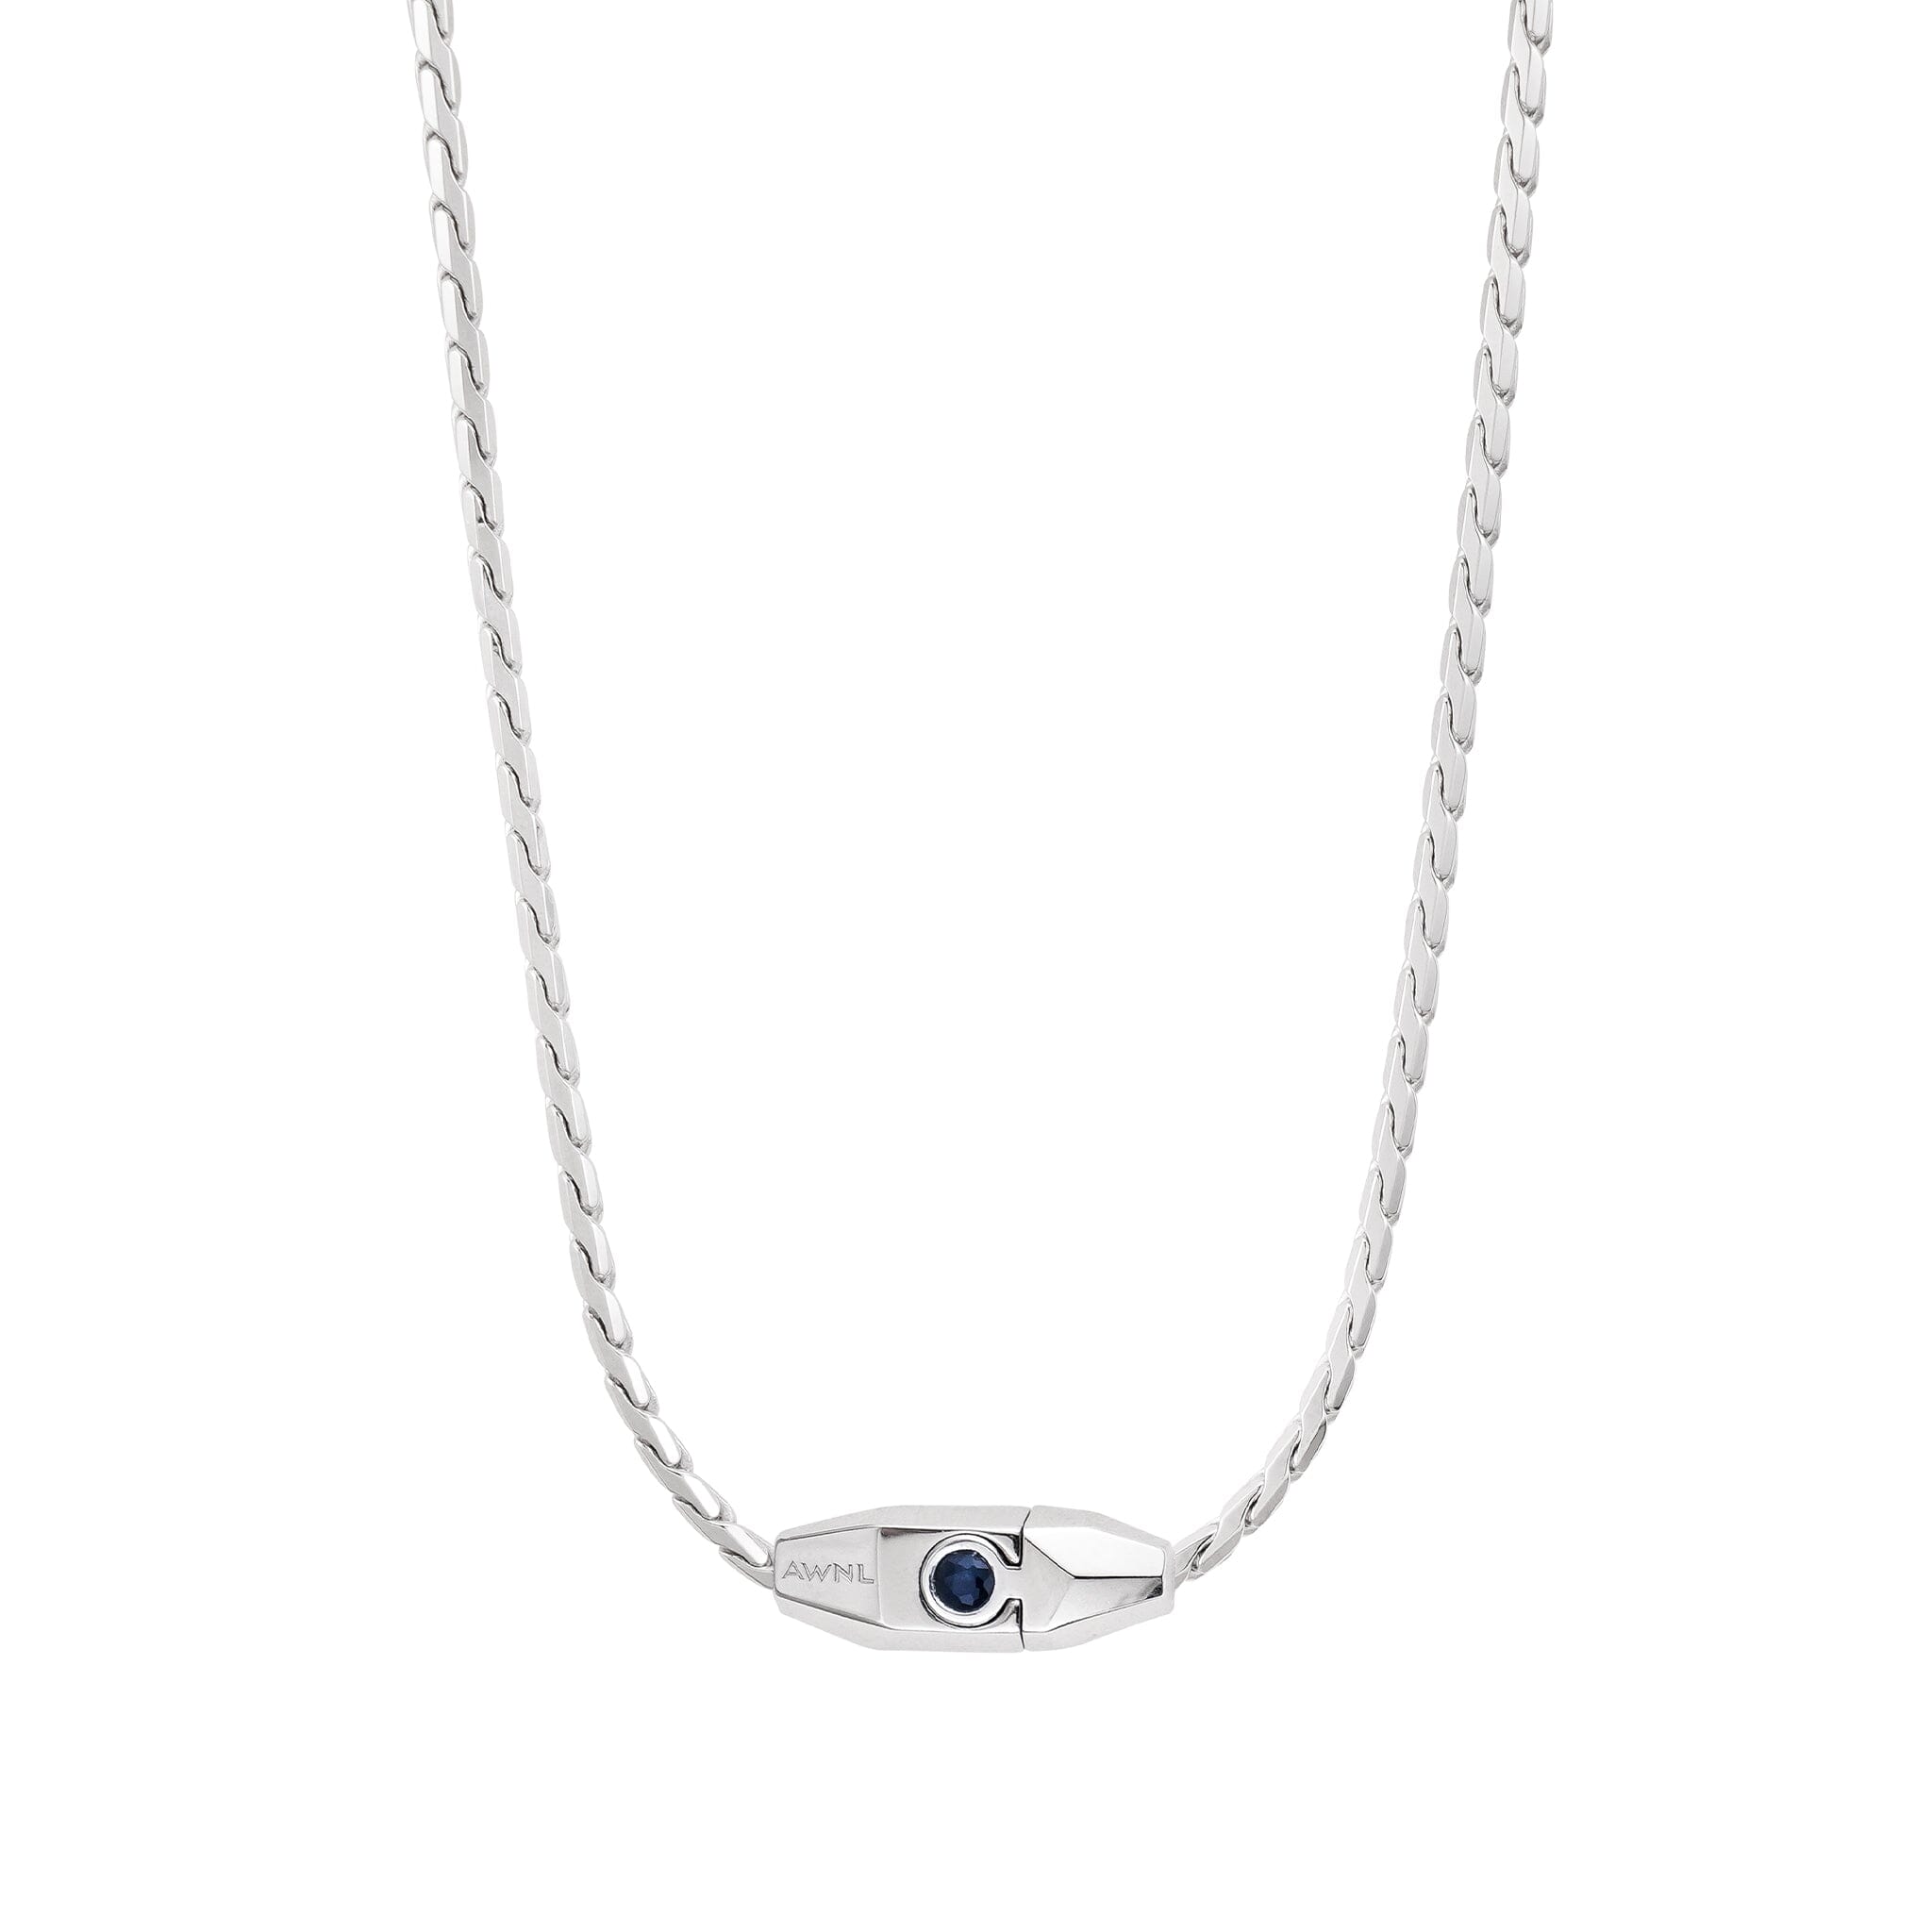 Men's Sterling Silver Chain Necklace with Sapphire Clasp Chains WAA FASHION GROUP Regular 